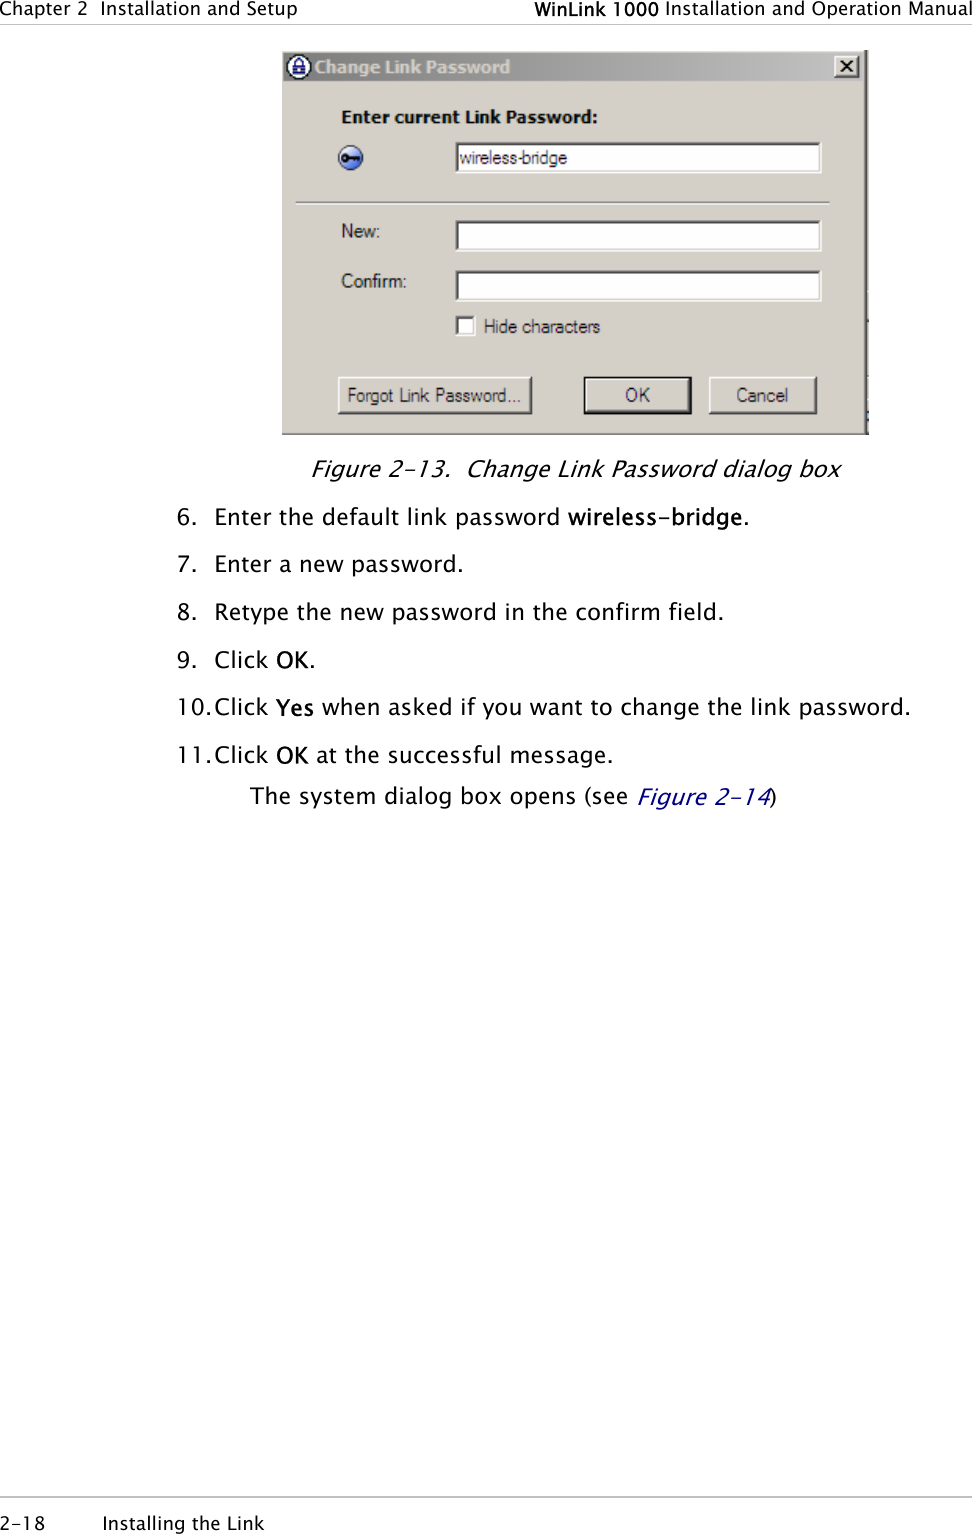 Chapter  2  Installation and Setup  WinLink 1000 Installation and Operation Manual  Figure  2-13.  Change Link Password dialog box 6. Enter the default link password wireless-bridge. 7. Enter a new password. 8. Retype the new password in the confirm field. 9. Click OK. 10. Click Yes when asked if you want to change the link password. 11. Click OK at the successful message. The system dialog box opens (see Figure  2-14) 2-18 Installing the Link   